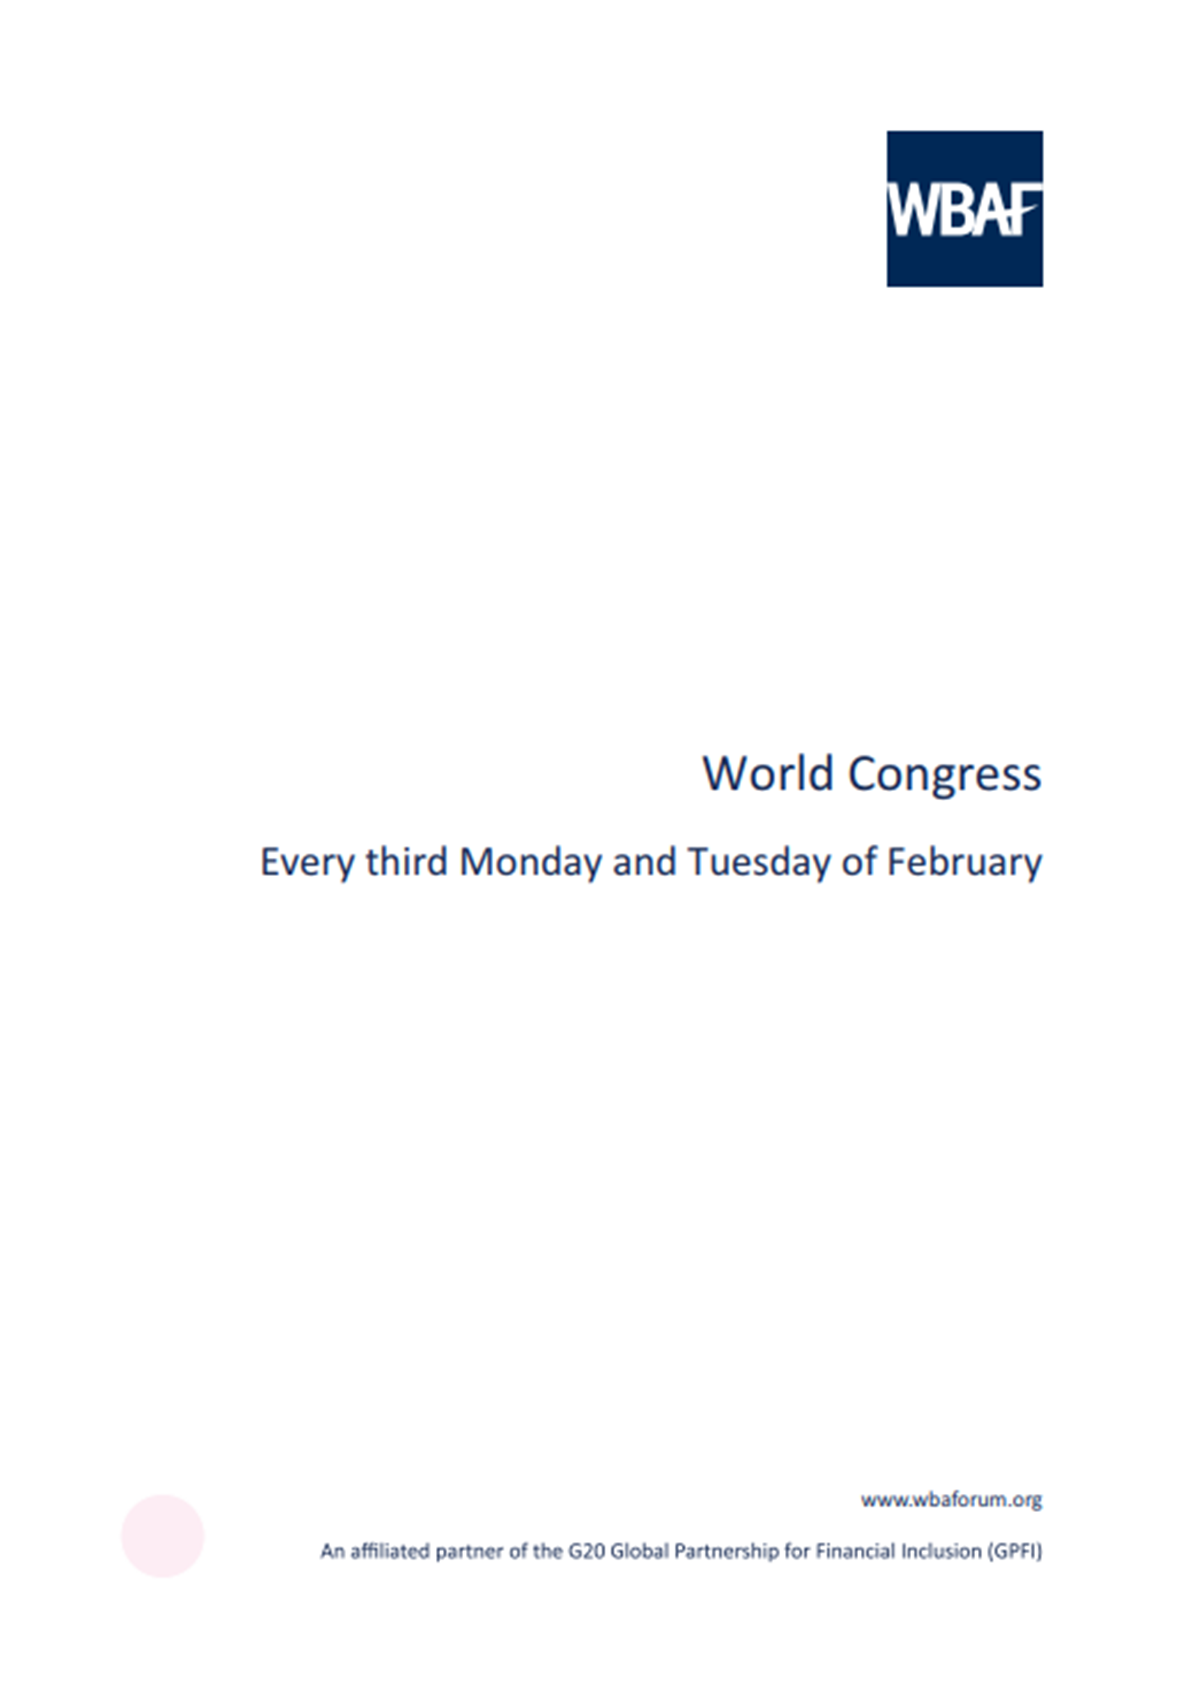 Word Congress - Every third Monday and Tuesday of February